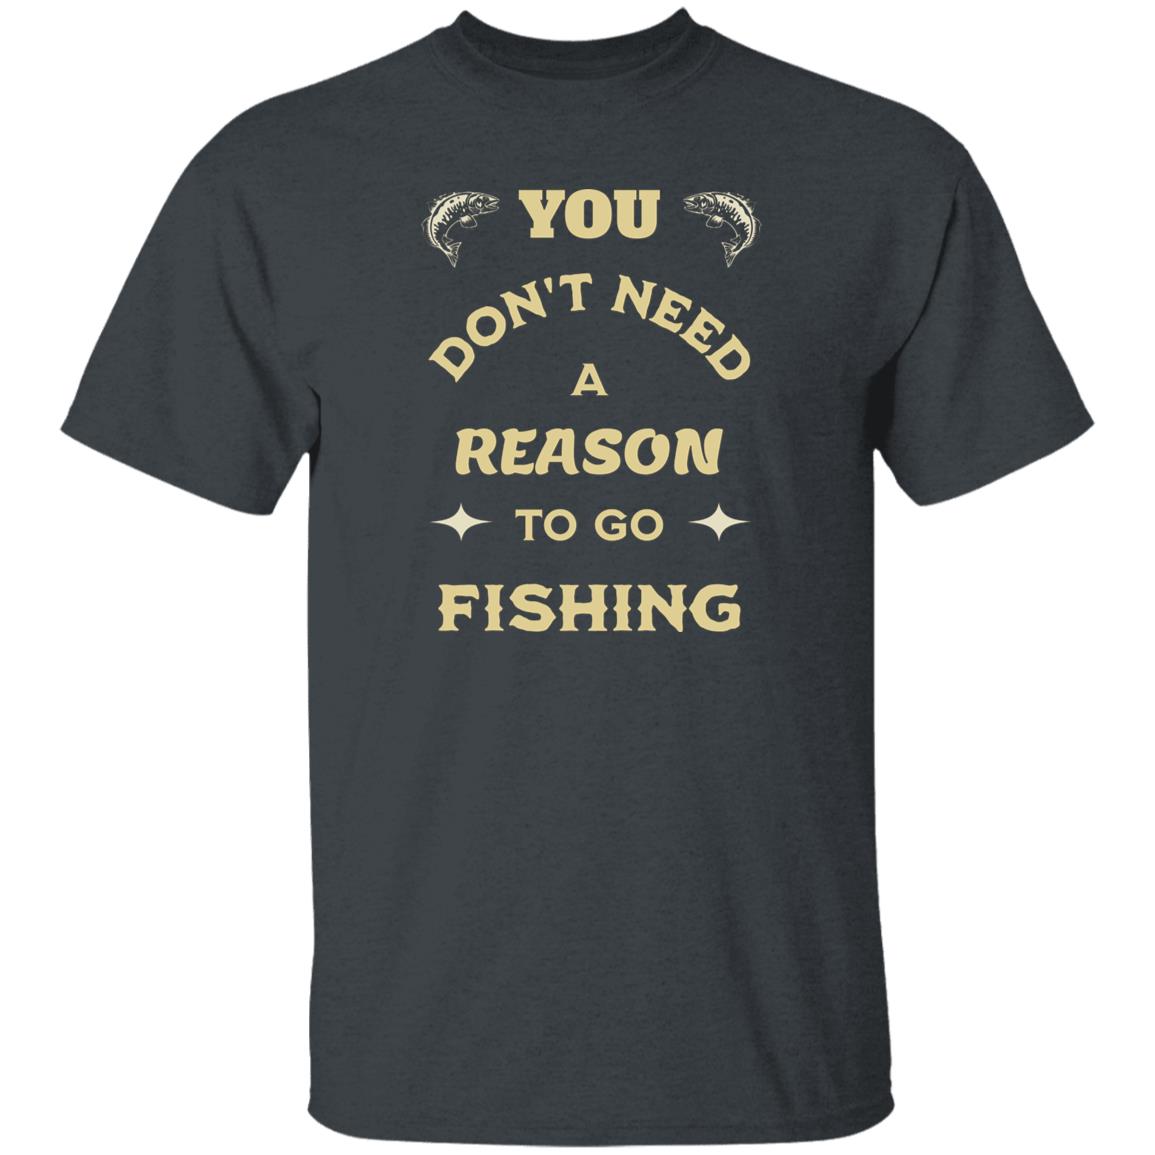 You don't need a reason to go fishing k t-shirt dark-heather